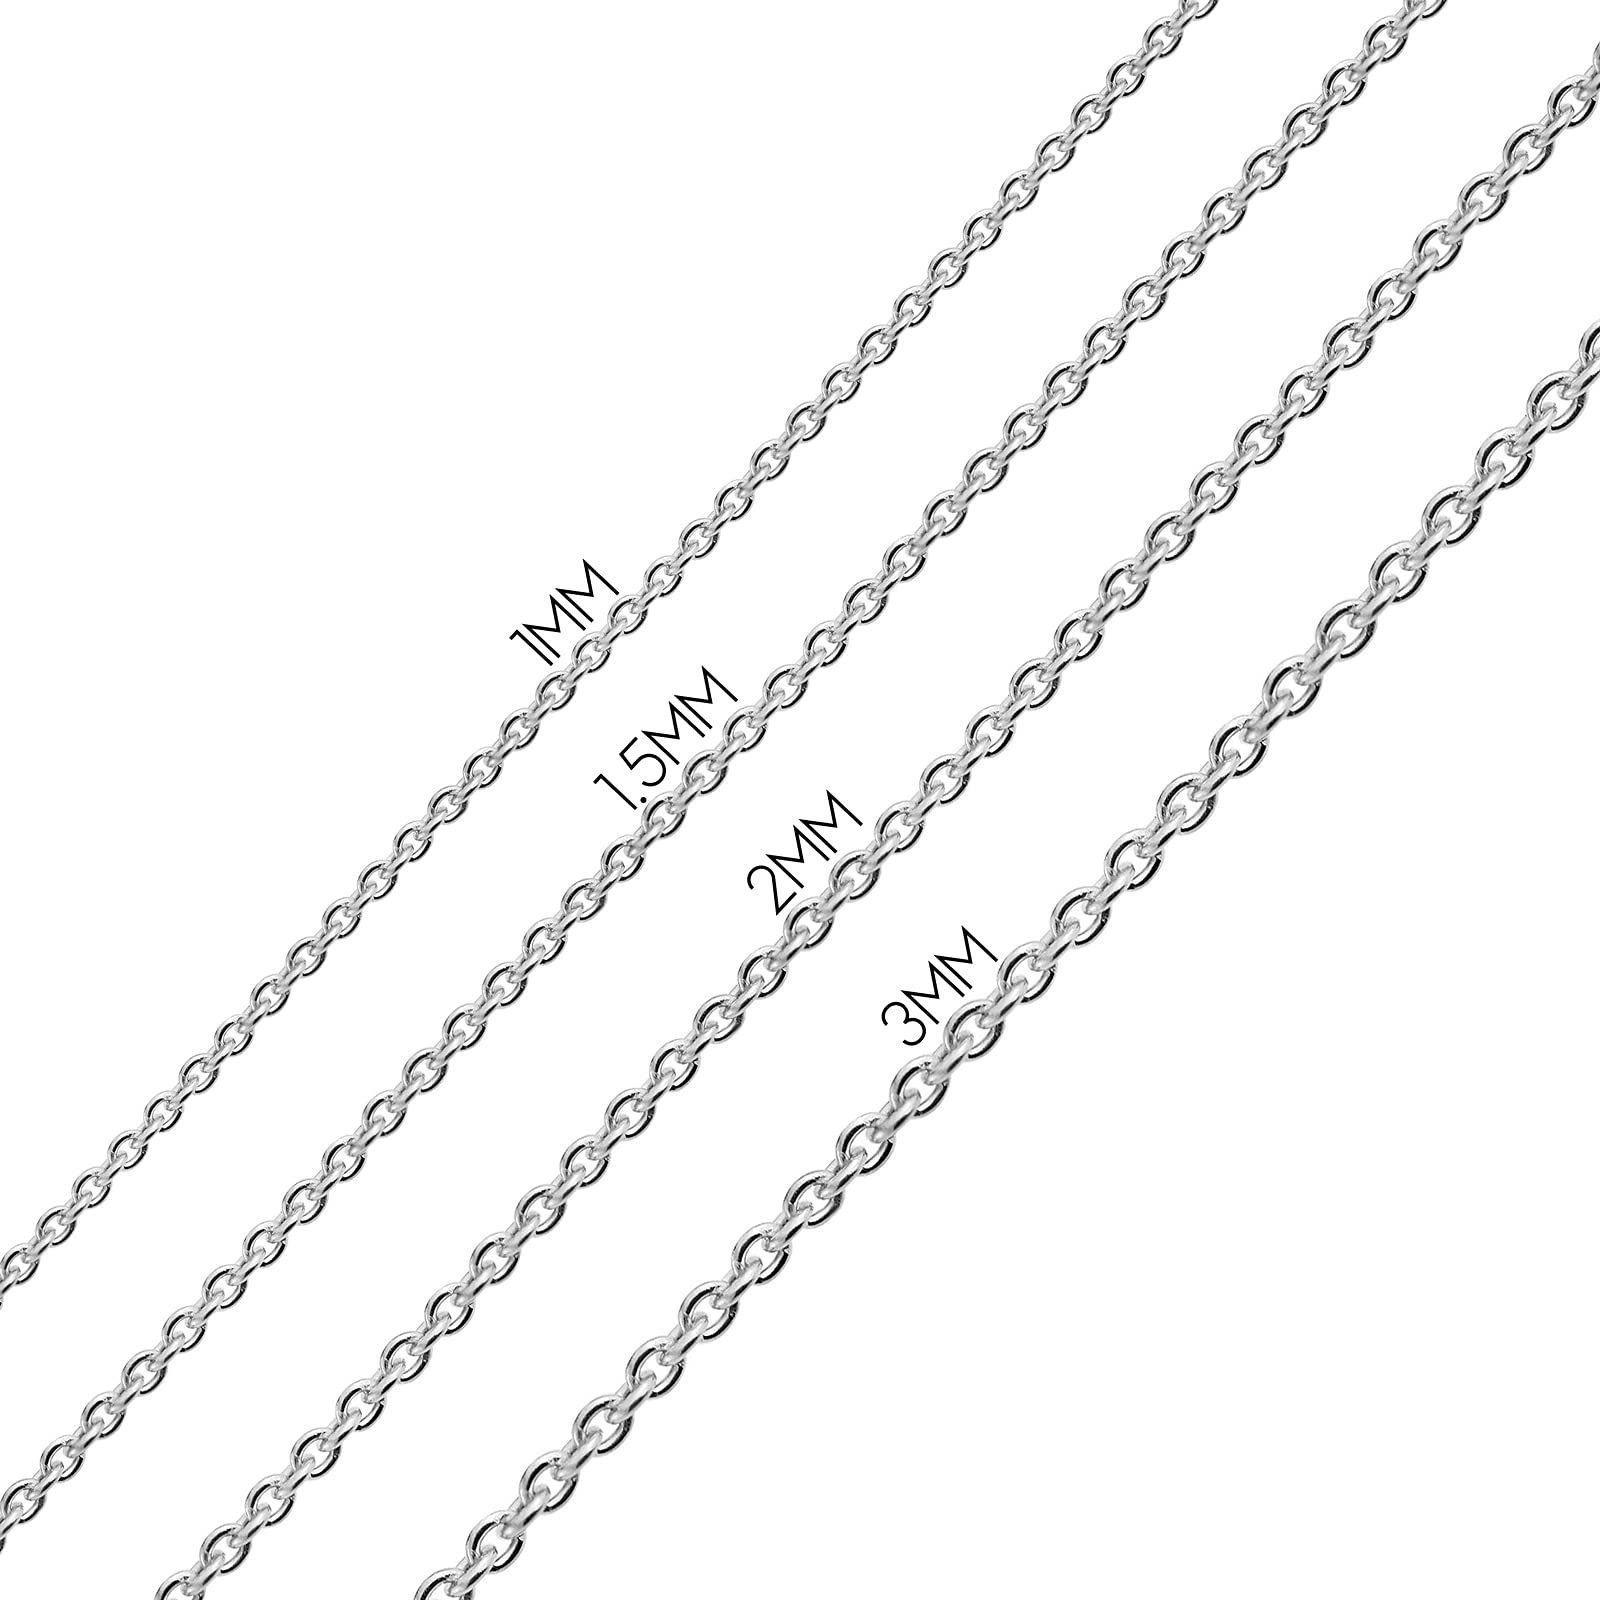 Bling Jewelry Thin 1.5MM Singapore Twist Rope Chain Necklace For Women Rose Gold Plated .925 Sterling Silver Made Italy 14 16 18 20 24 Inch